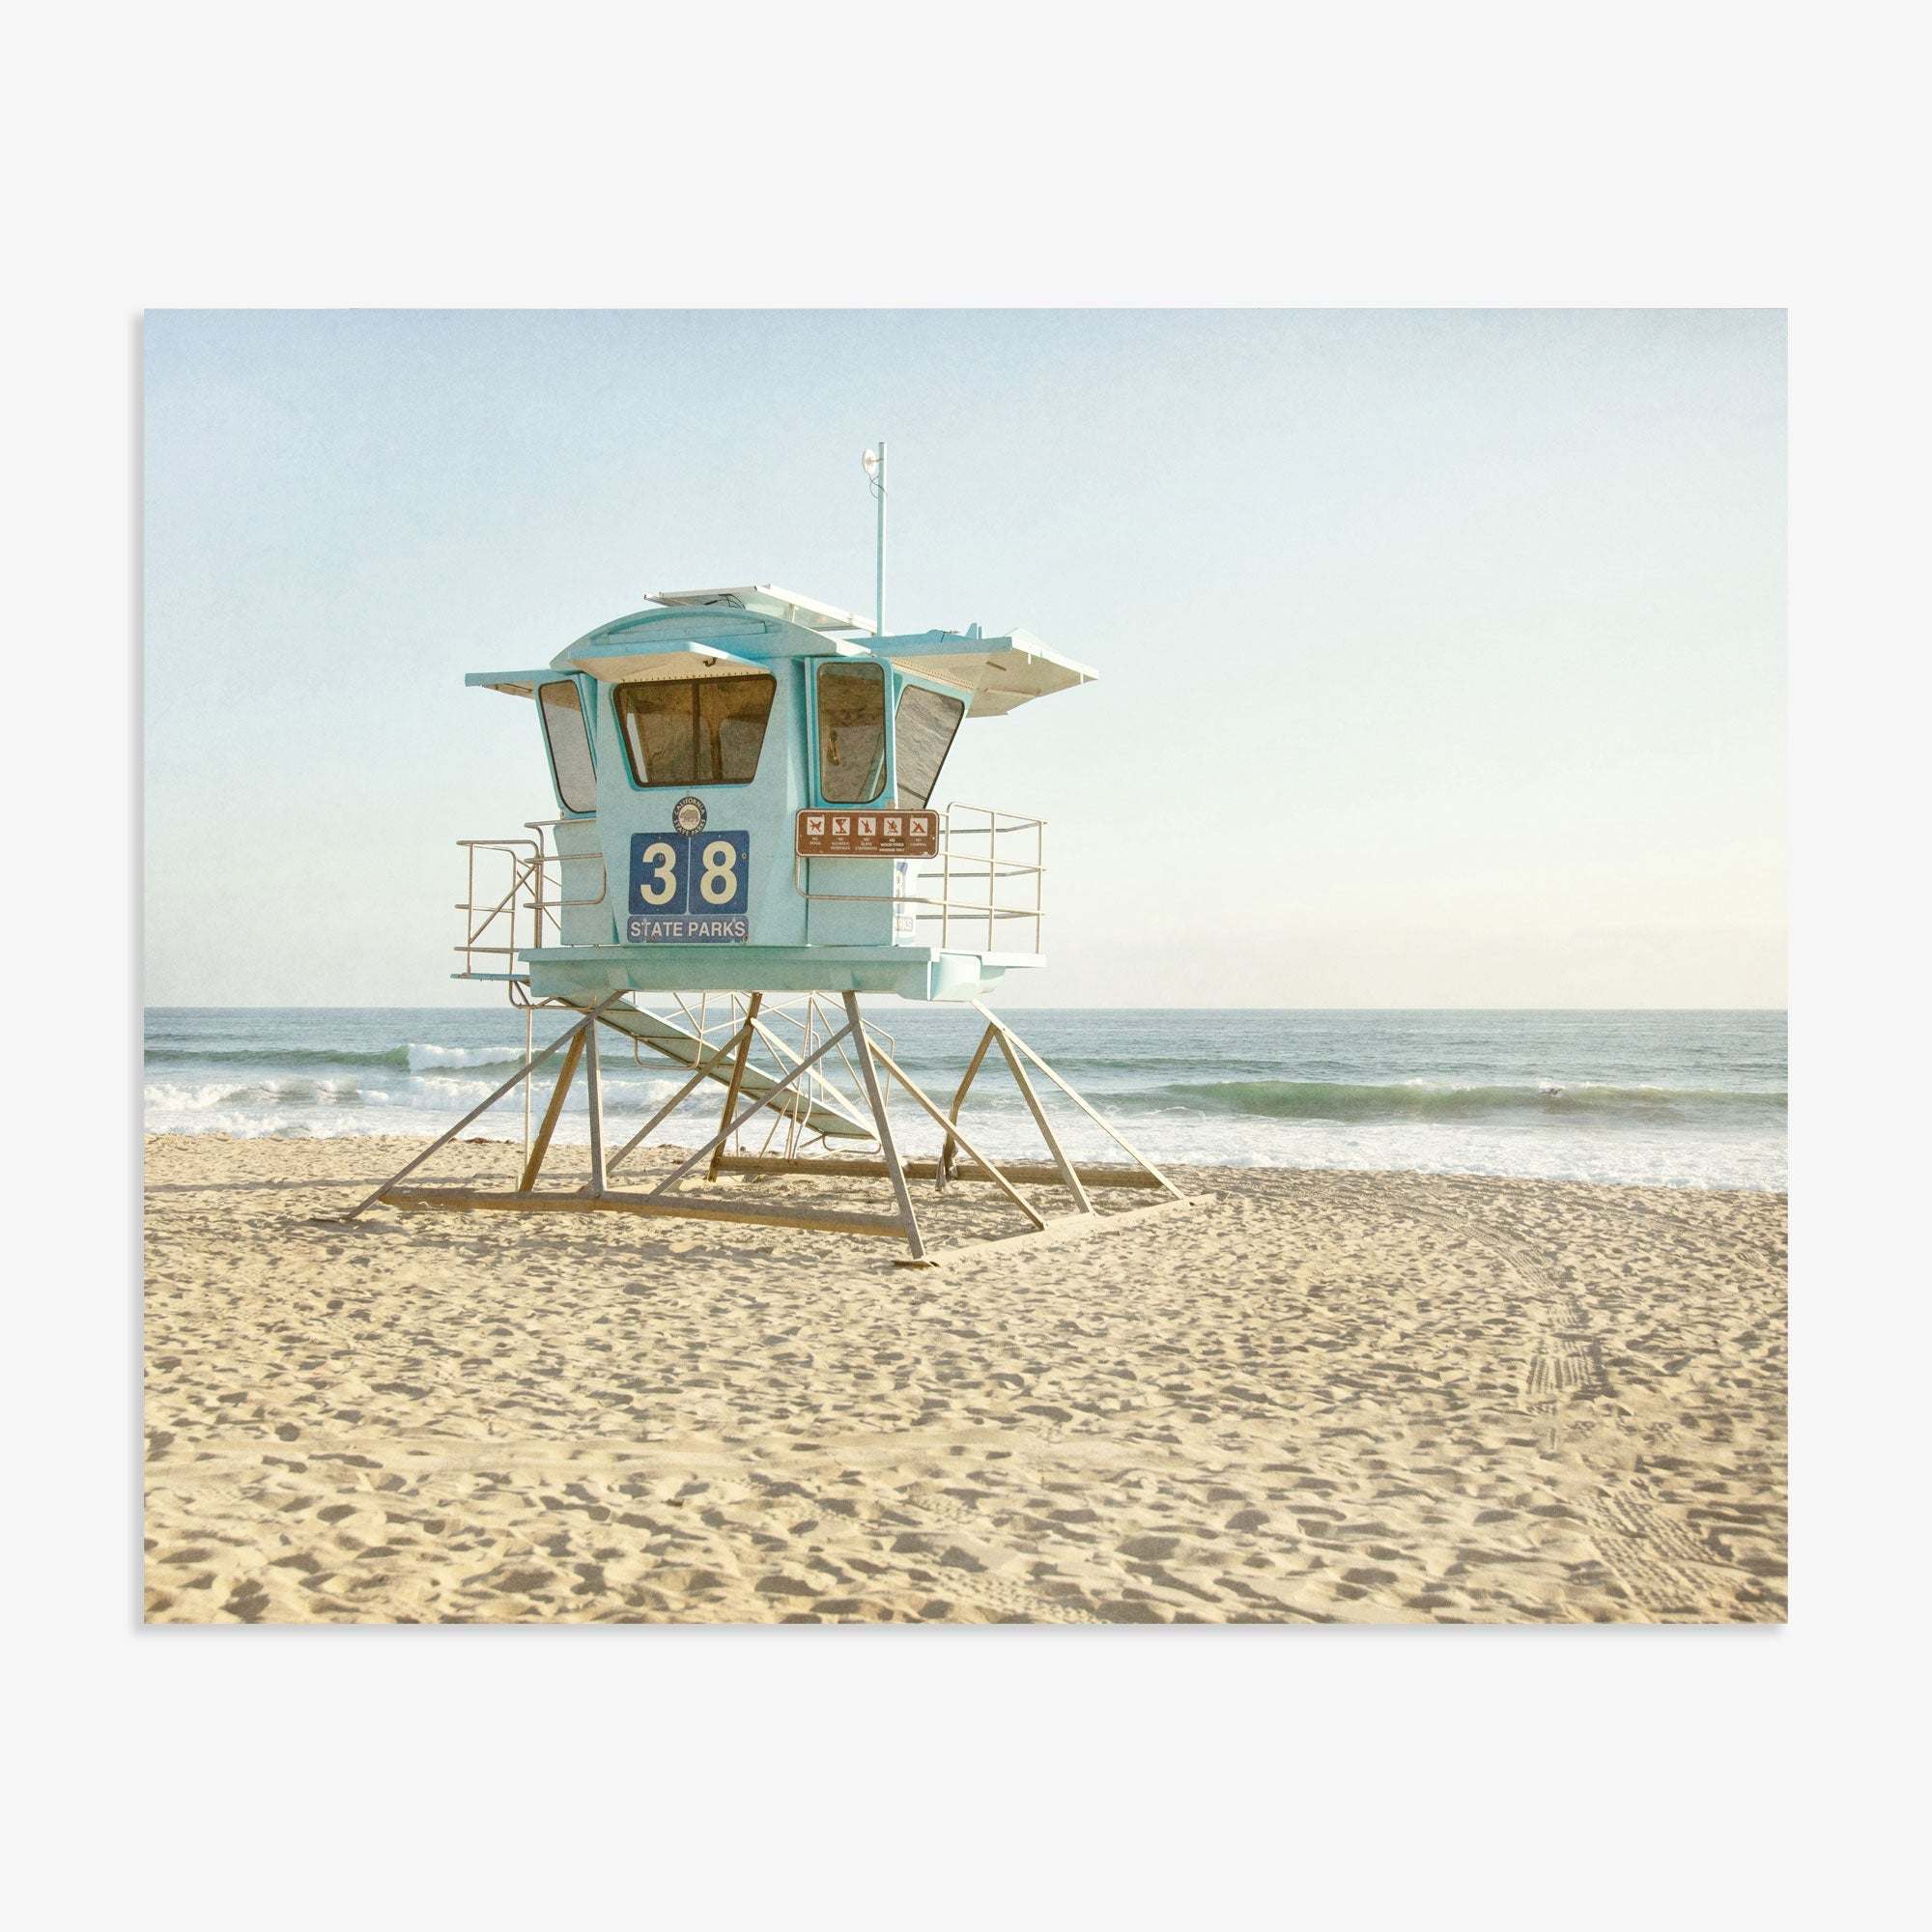 A picturesque scene of a lifeguard station, number 38, on a sandy beach with the ocean in the background under a clear sky, captured on Offley Green&#39;s California Coastal Print, &#39;Carlsbad Lifeguard Tower.&#39;